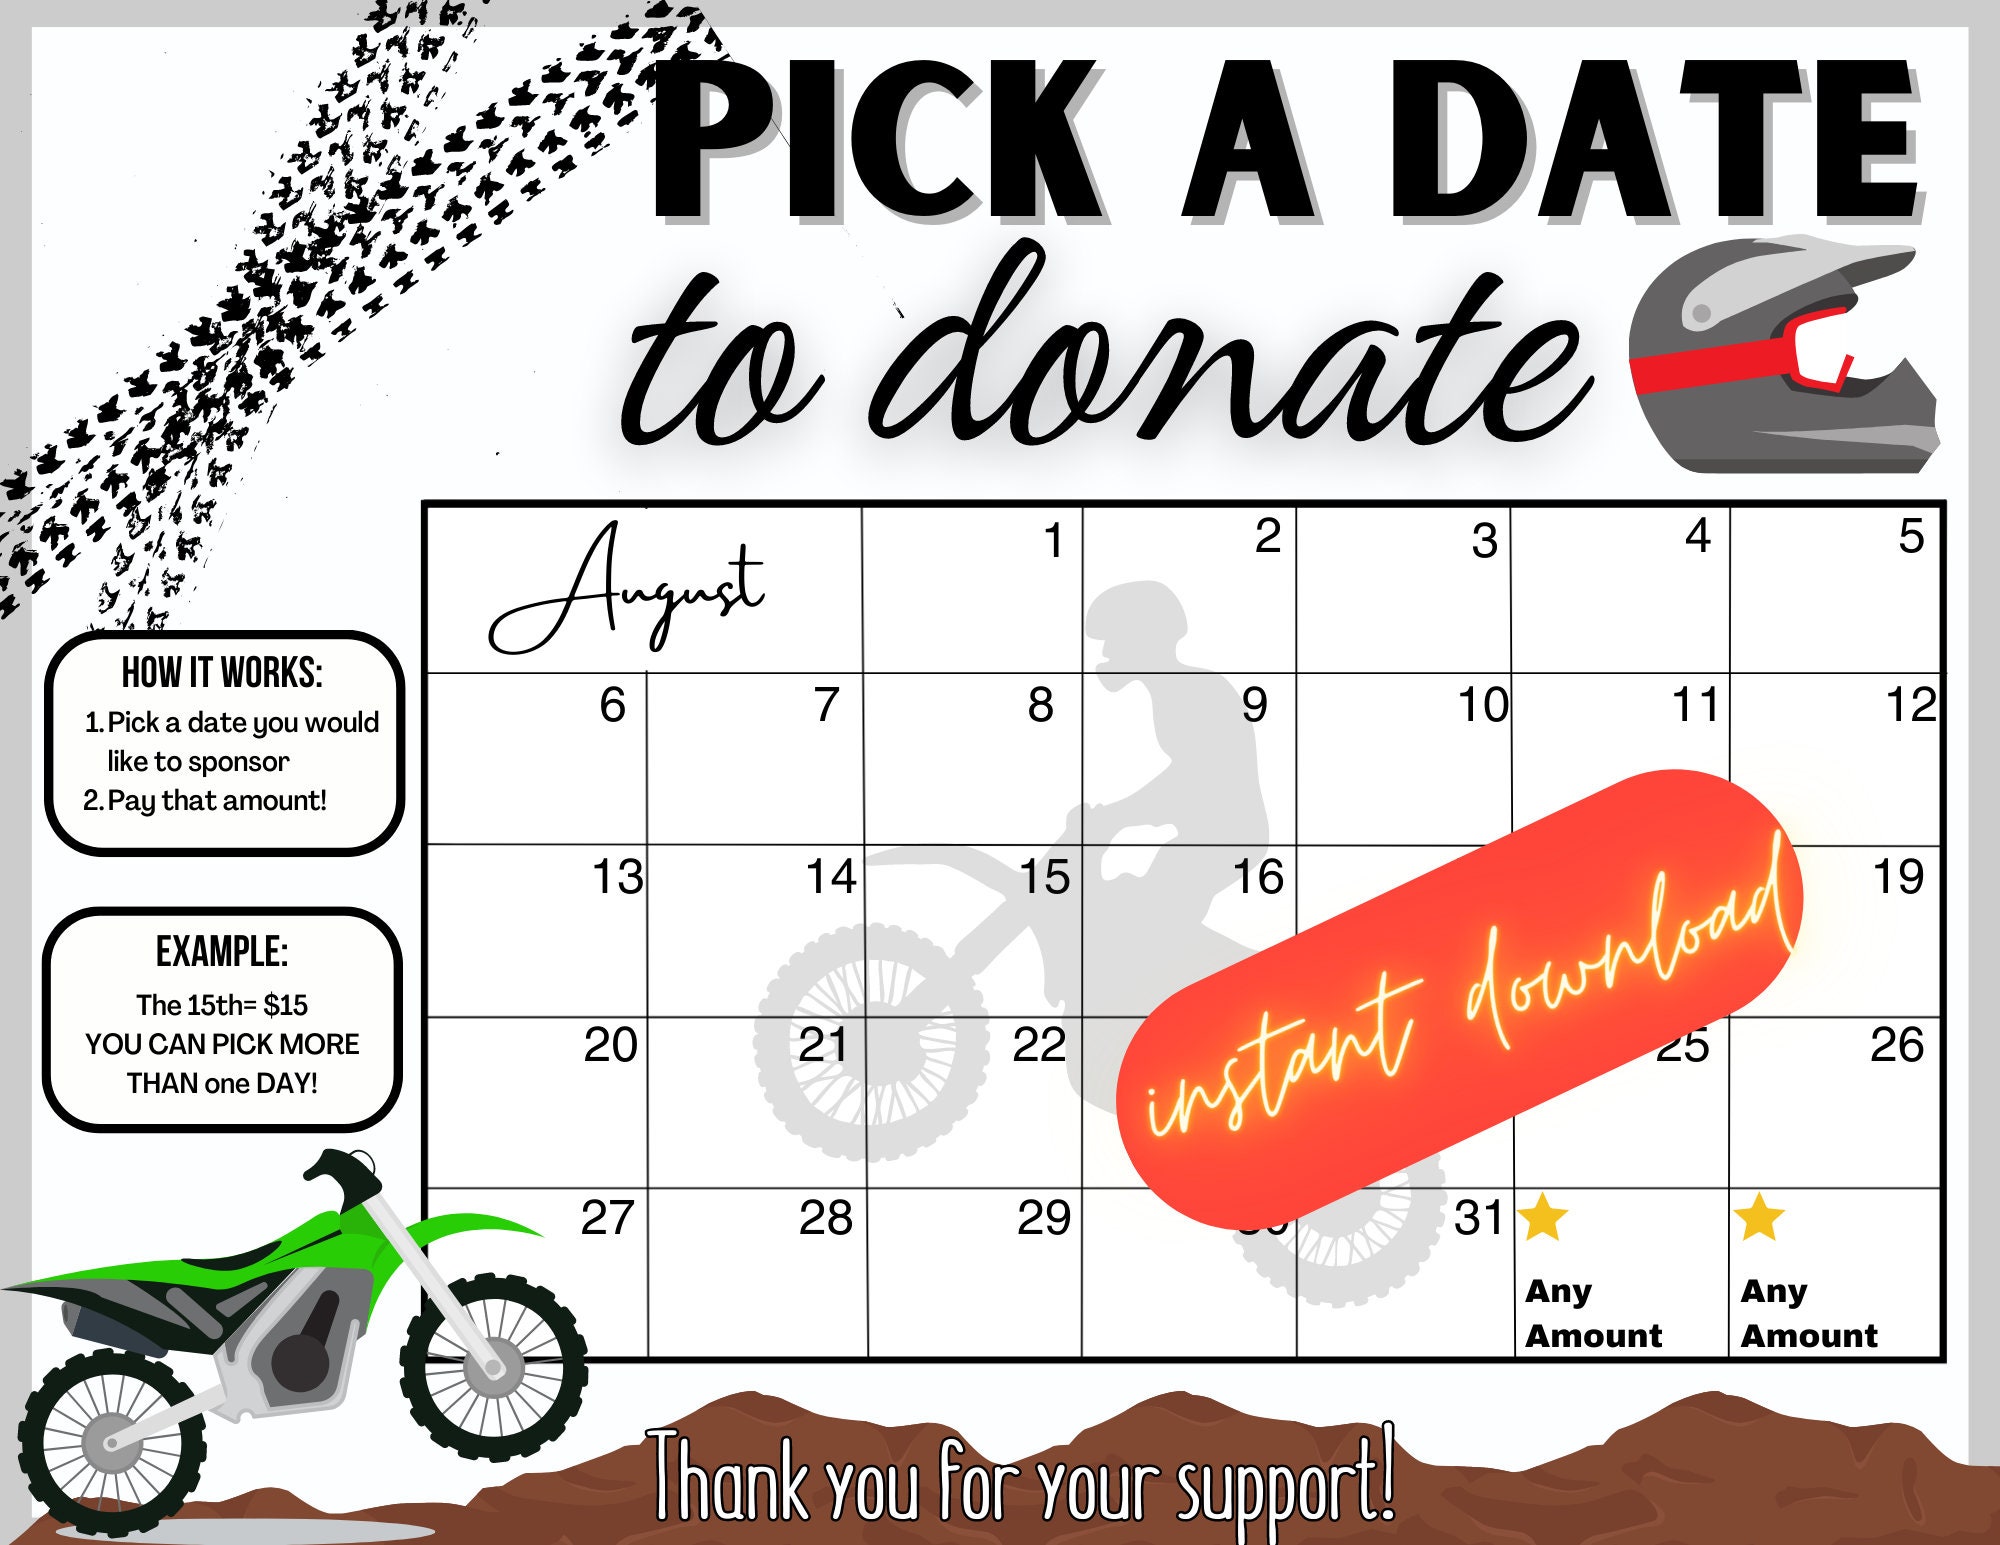 Bicycle Calendar: Cycle-And-Recycle and Solidarity Calendars